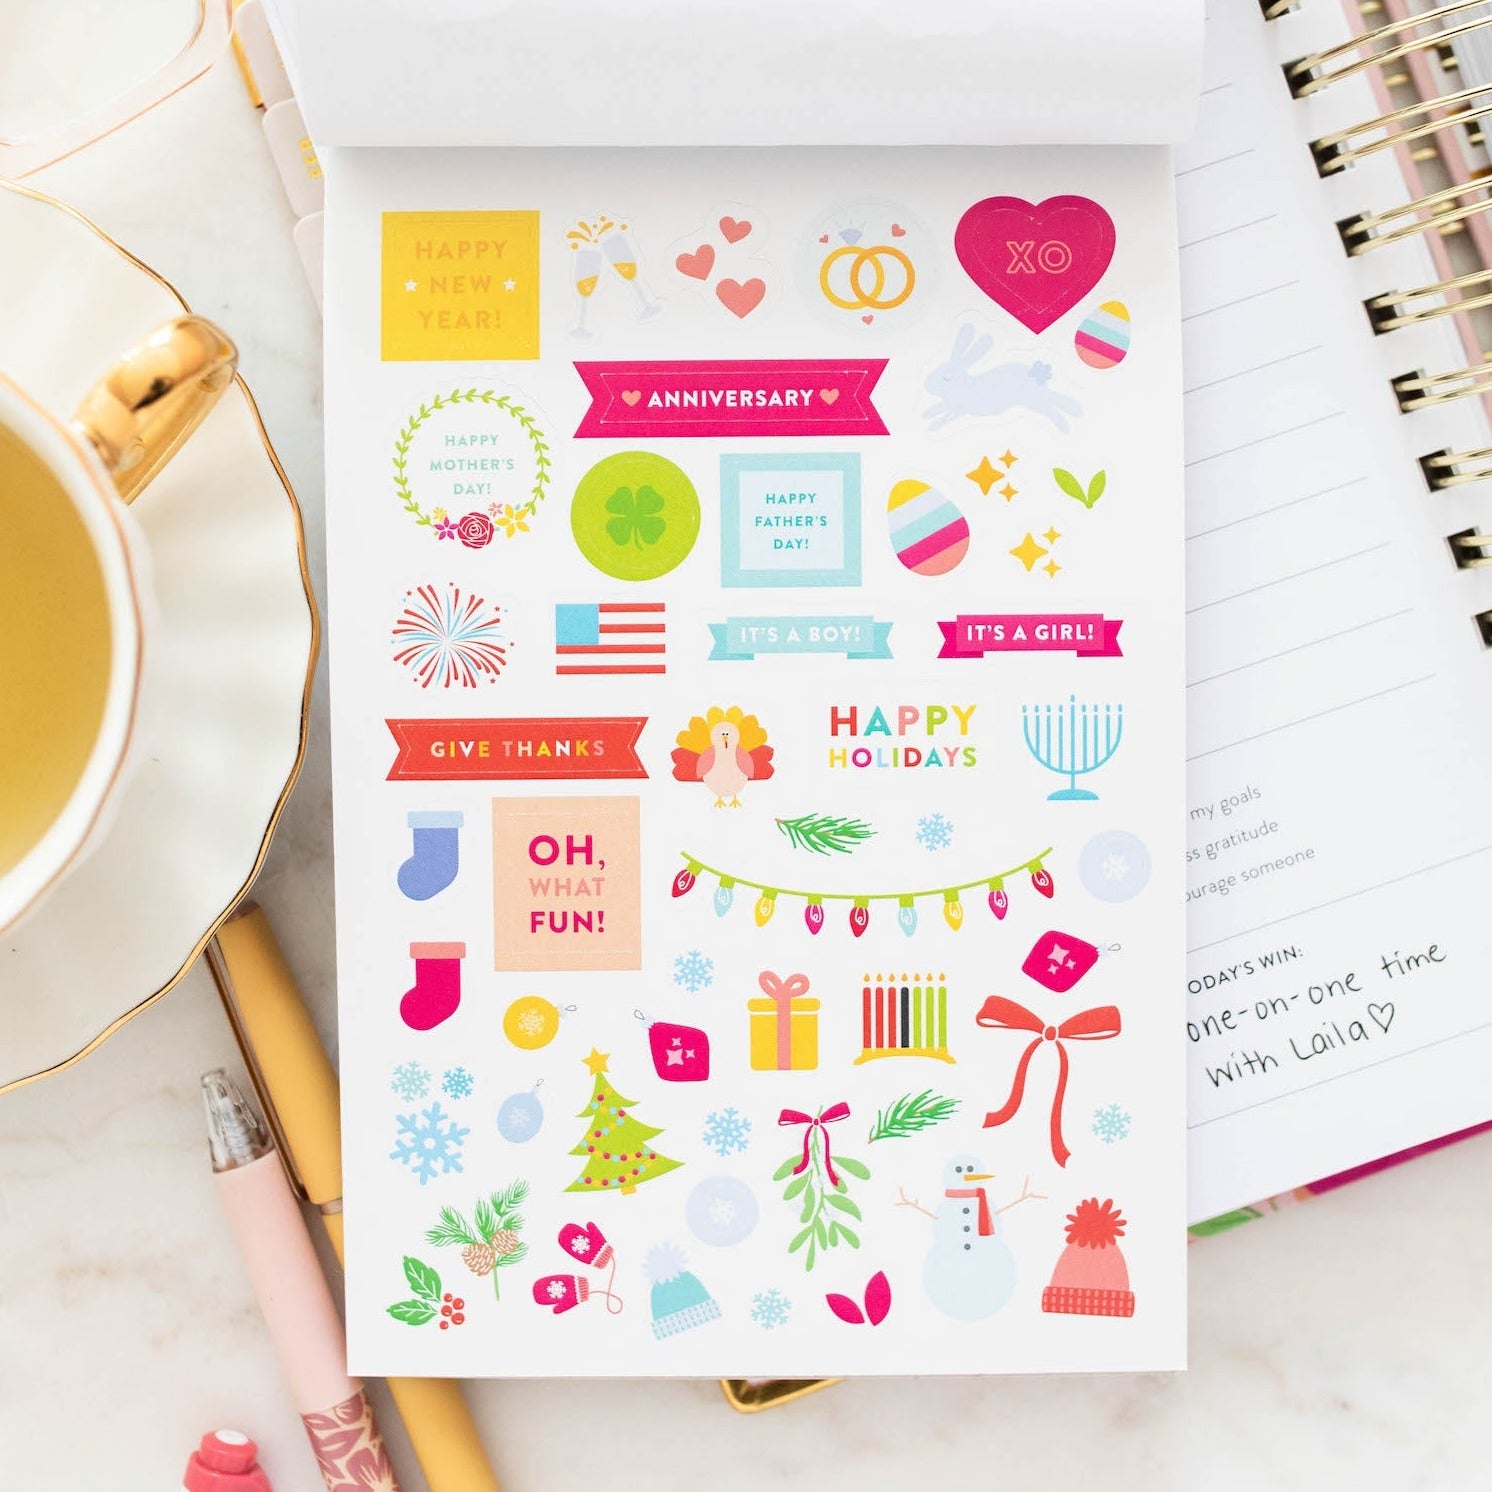 bloom daily planners Holiday Planner Stickers, Over 250 Stickers 